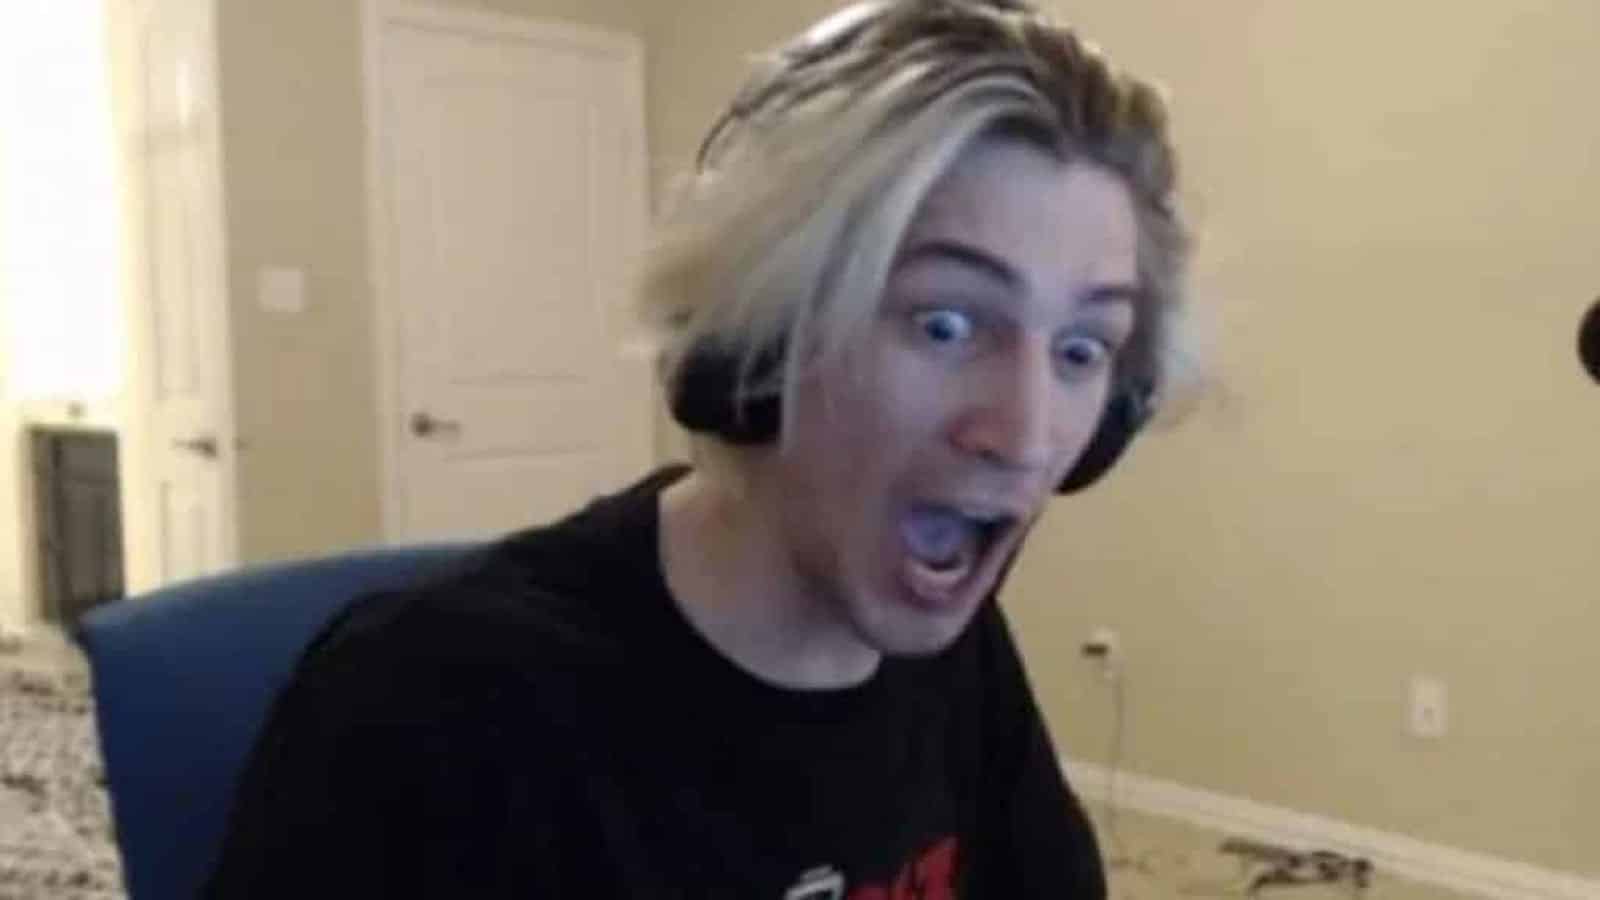 xQc freaks out during Twitch horror stream and it's hilarious - Dexerto